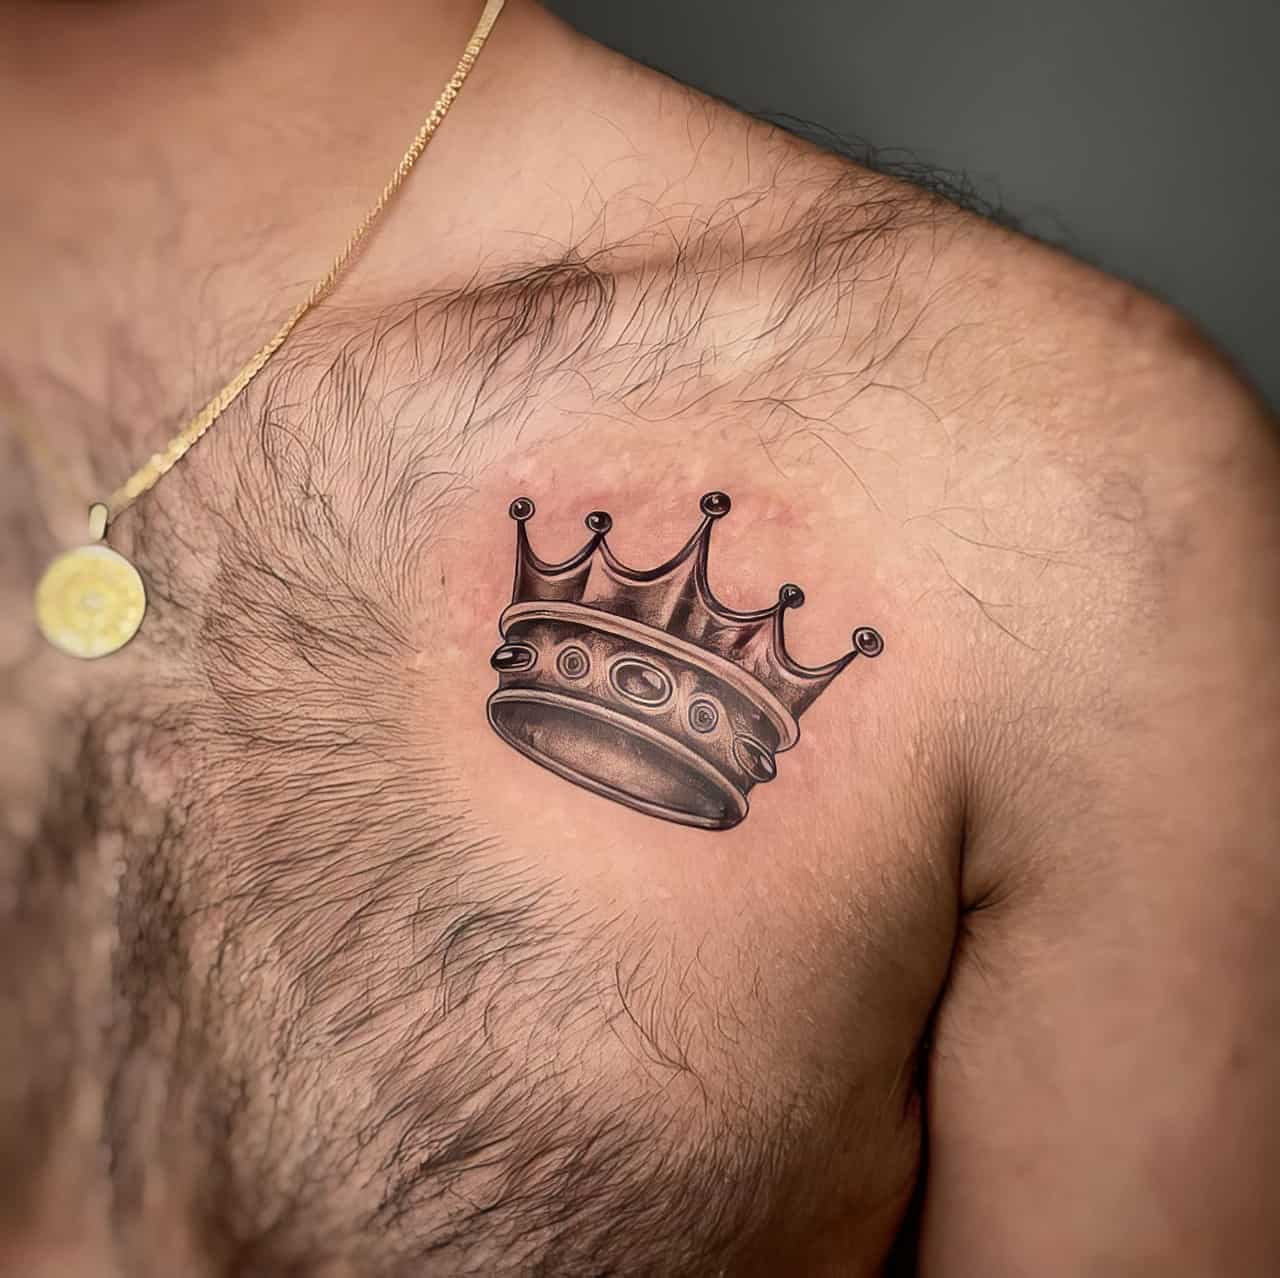 Meaning of Crown Tattoos